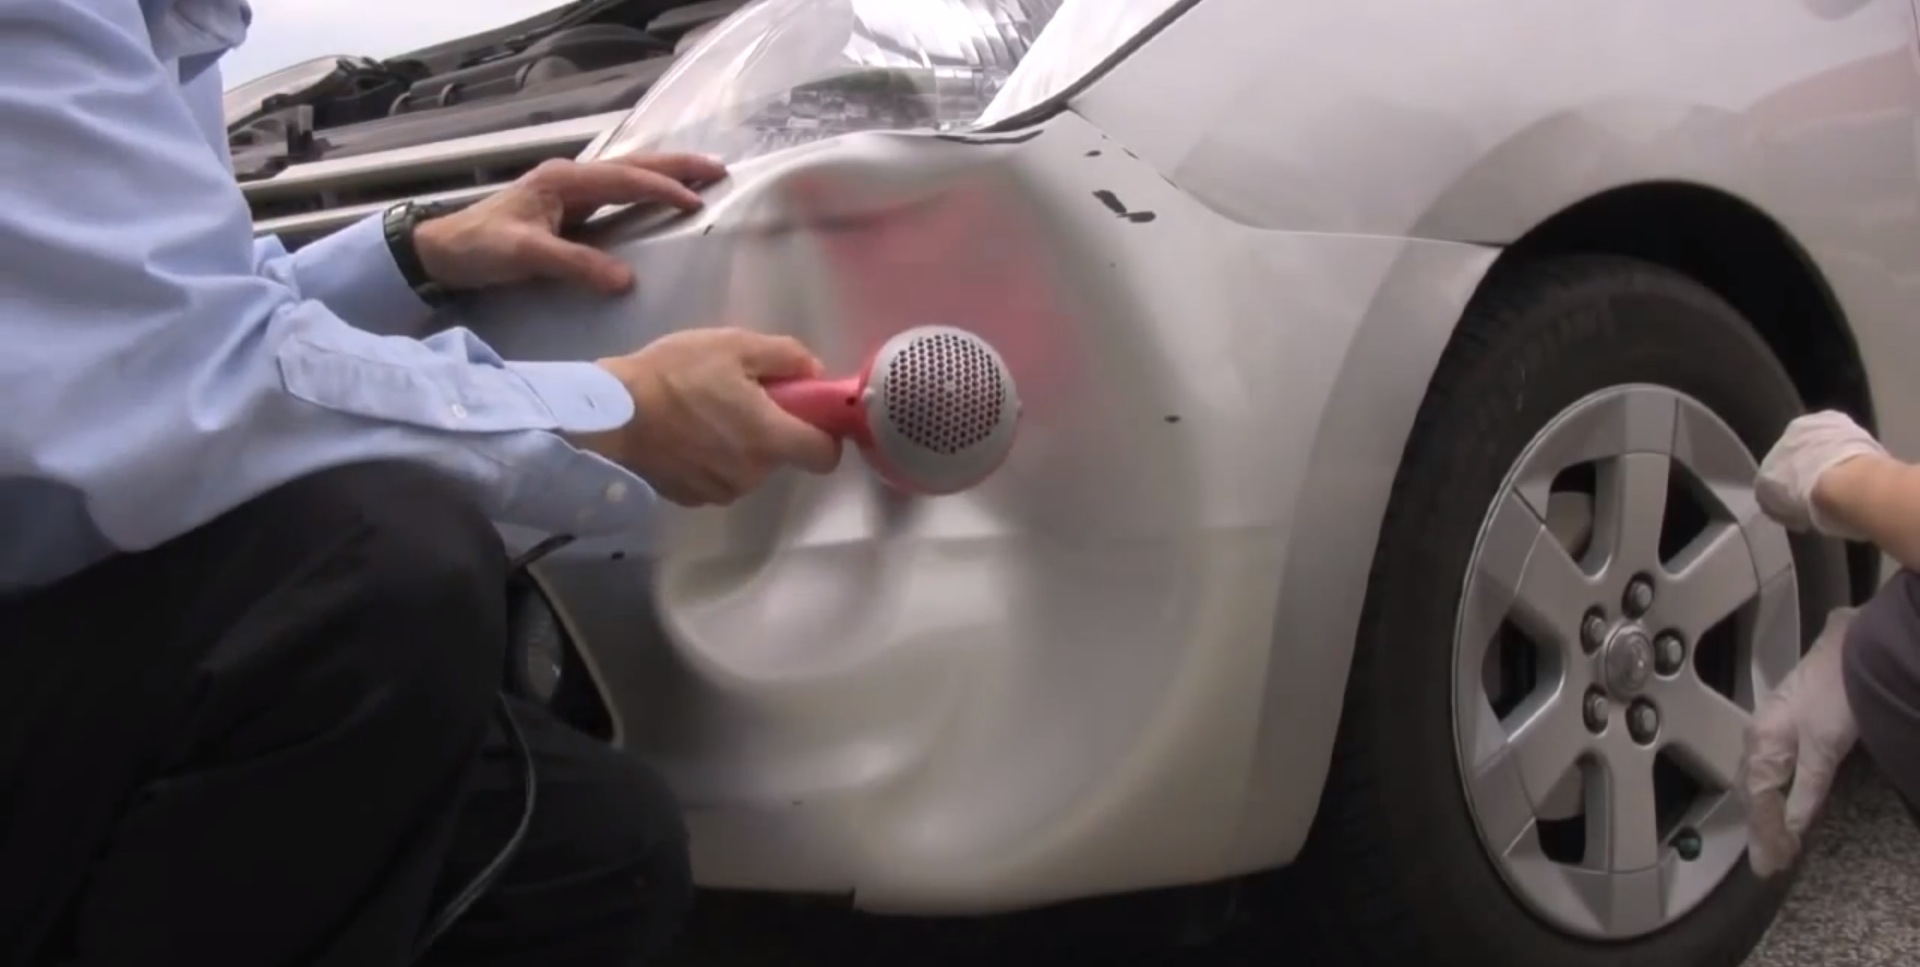 How Much Should It Cost To Have Small Dents Removed From Your Car?